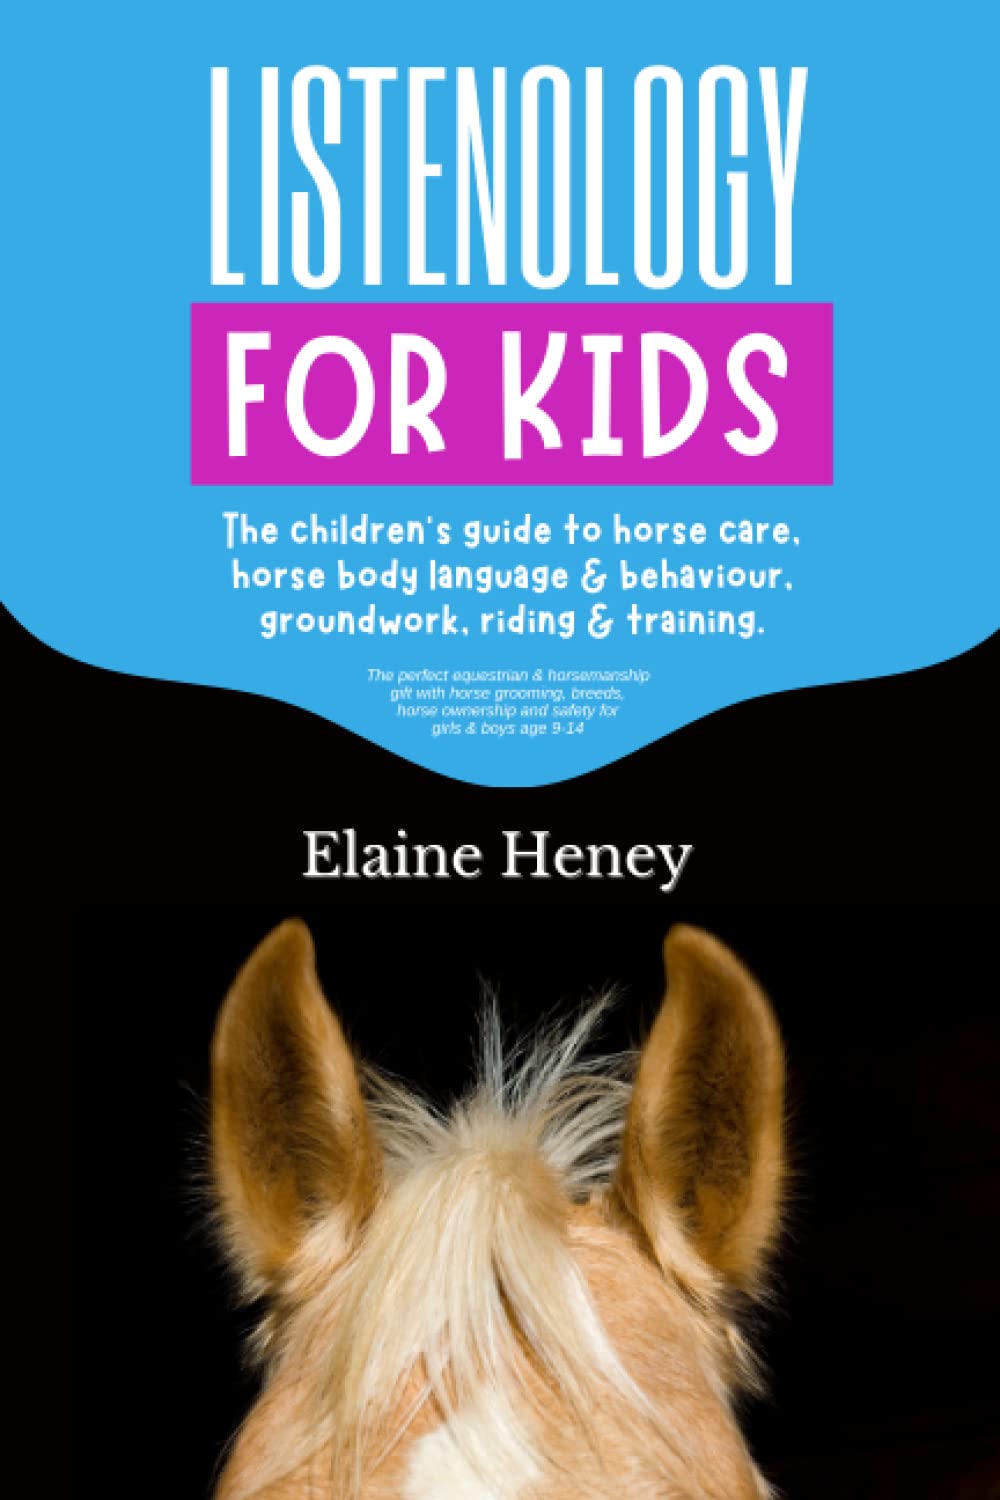 Listenology for Kids – The children’s guide to horse care, horse body language & behavior, groundwork, riding & training. The perfect equestrian & … and safety for girls & boys age 9-14